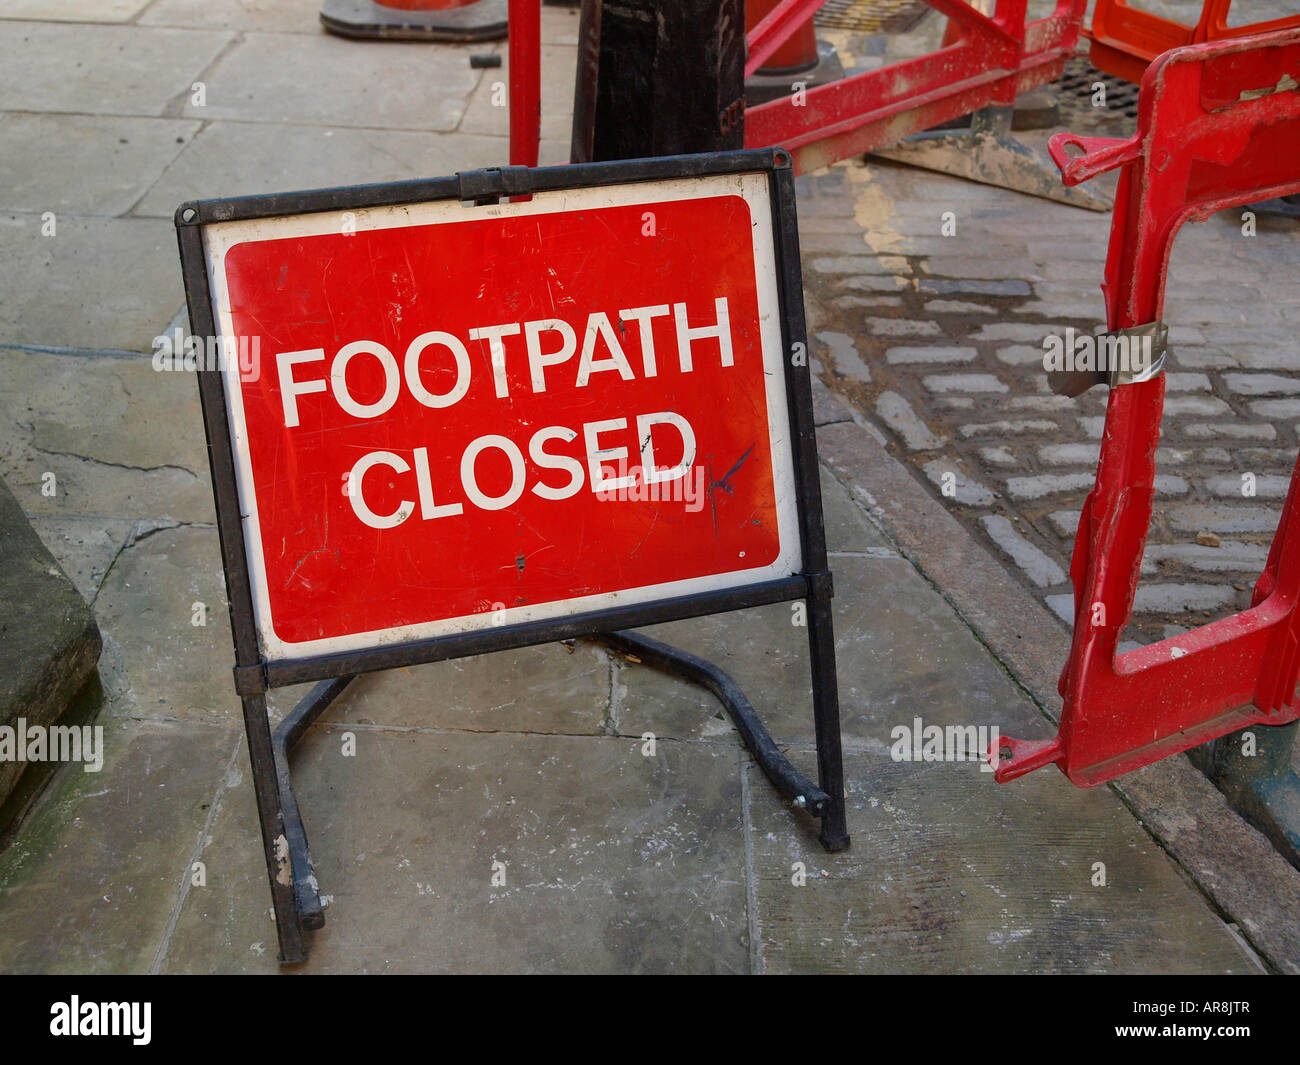 Footpath closed sign Stock Photo